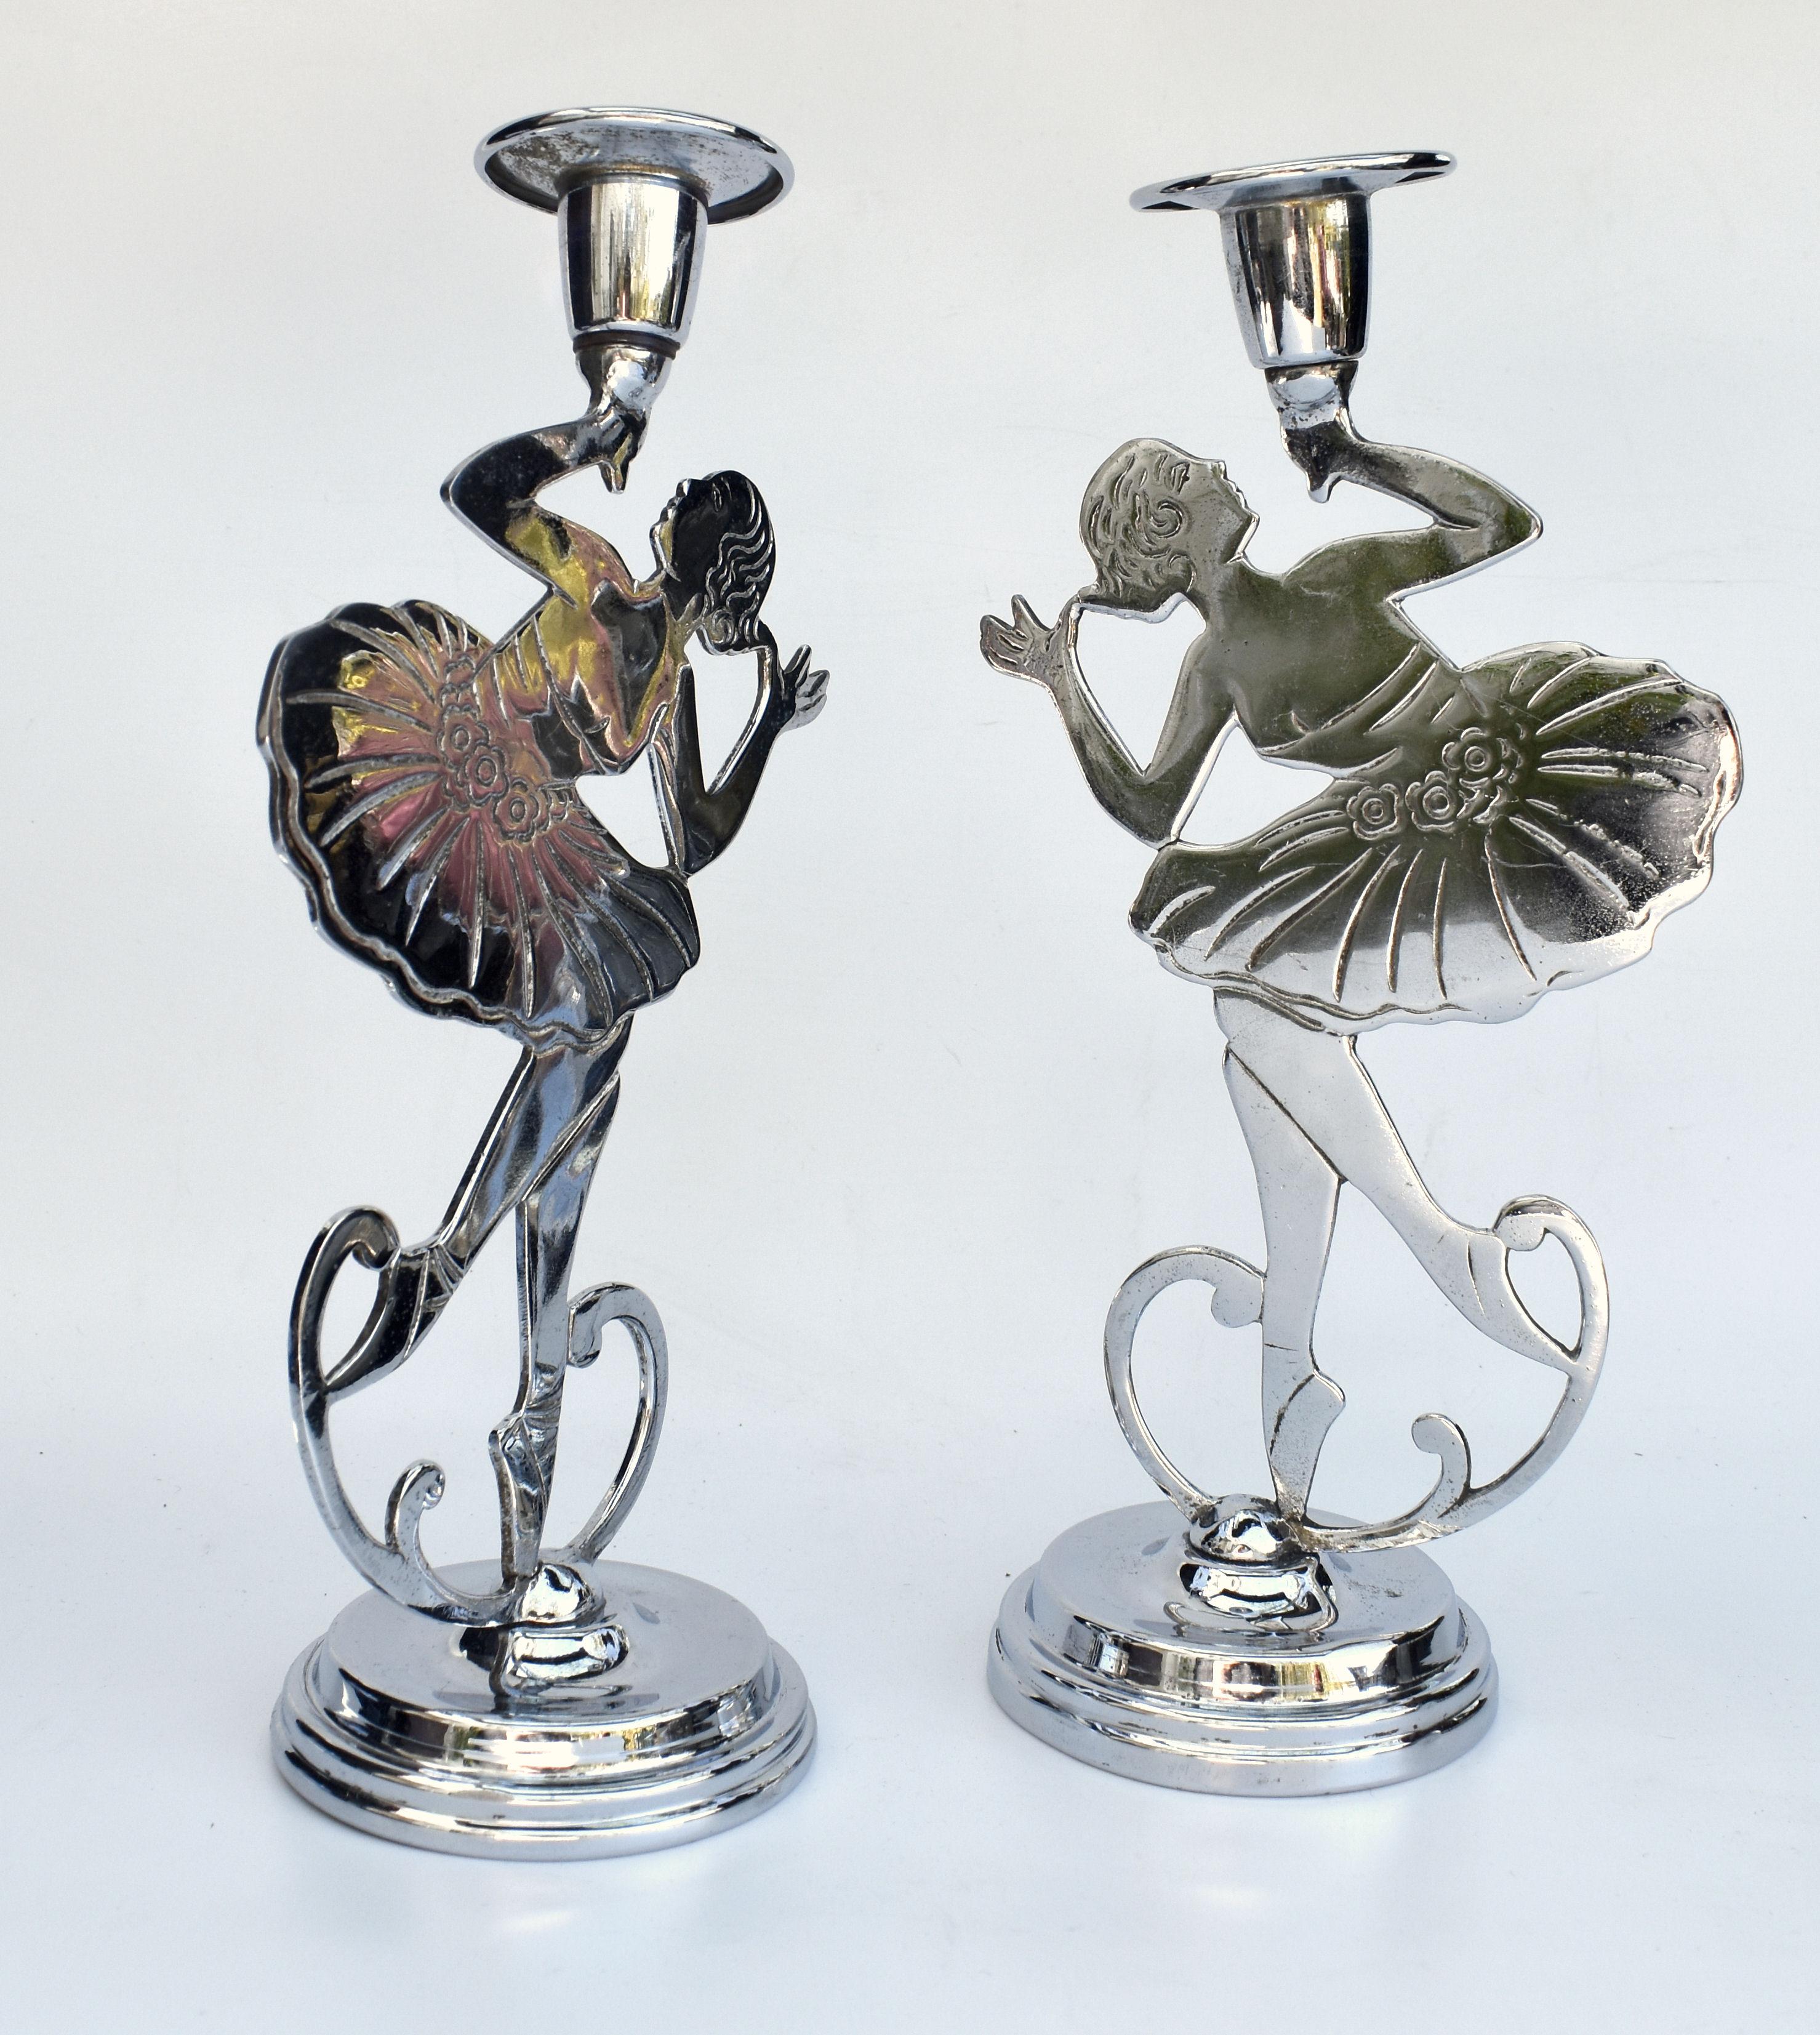 For your consideration are there matching pair of highly collectable 1930s chrome Art Deco double candlesticks featuring two dimensional dancing girls . Condition is great with minor clues to the real age. These are a very stylish product of the